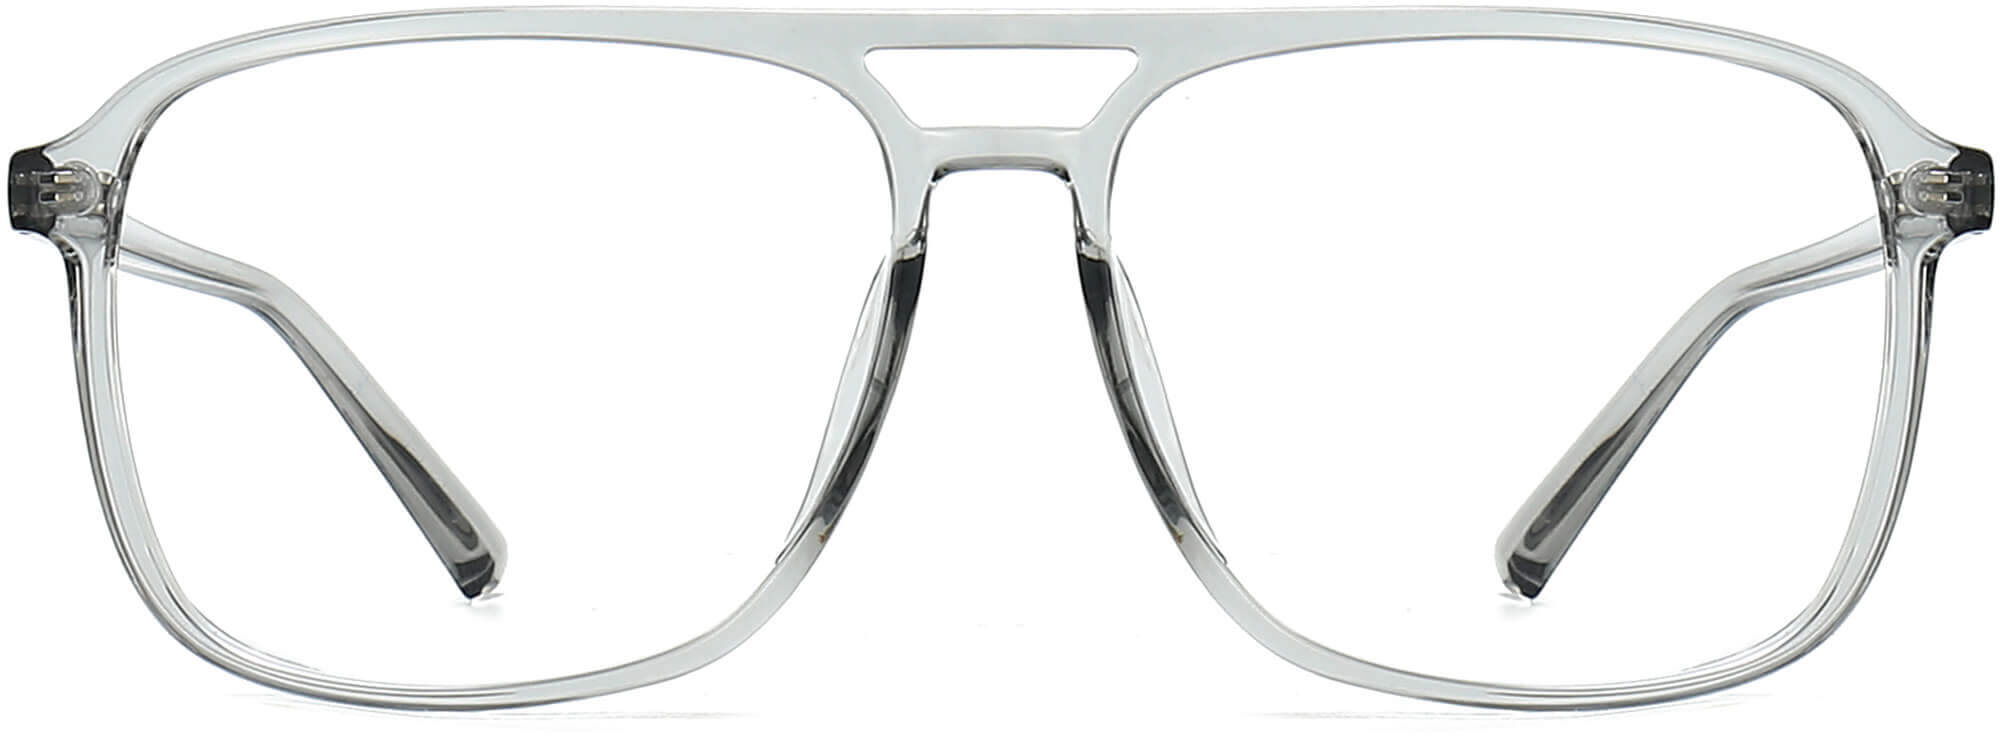 Natalia Square Clear Gray Eyeglasses from ANRRI, front view